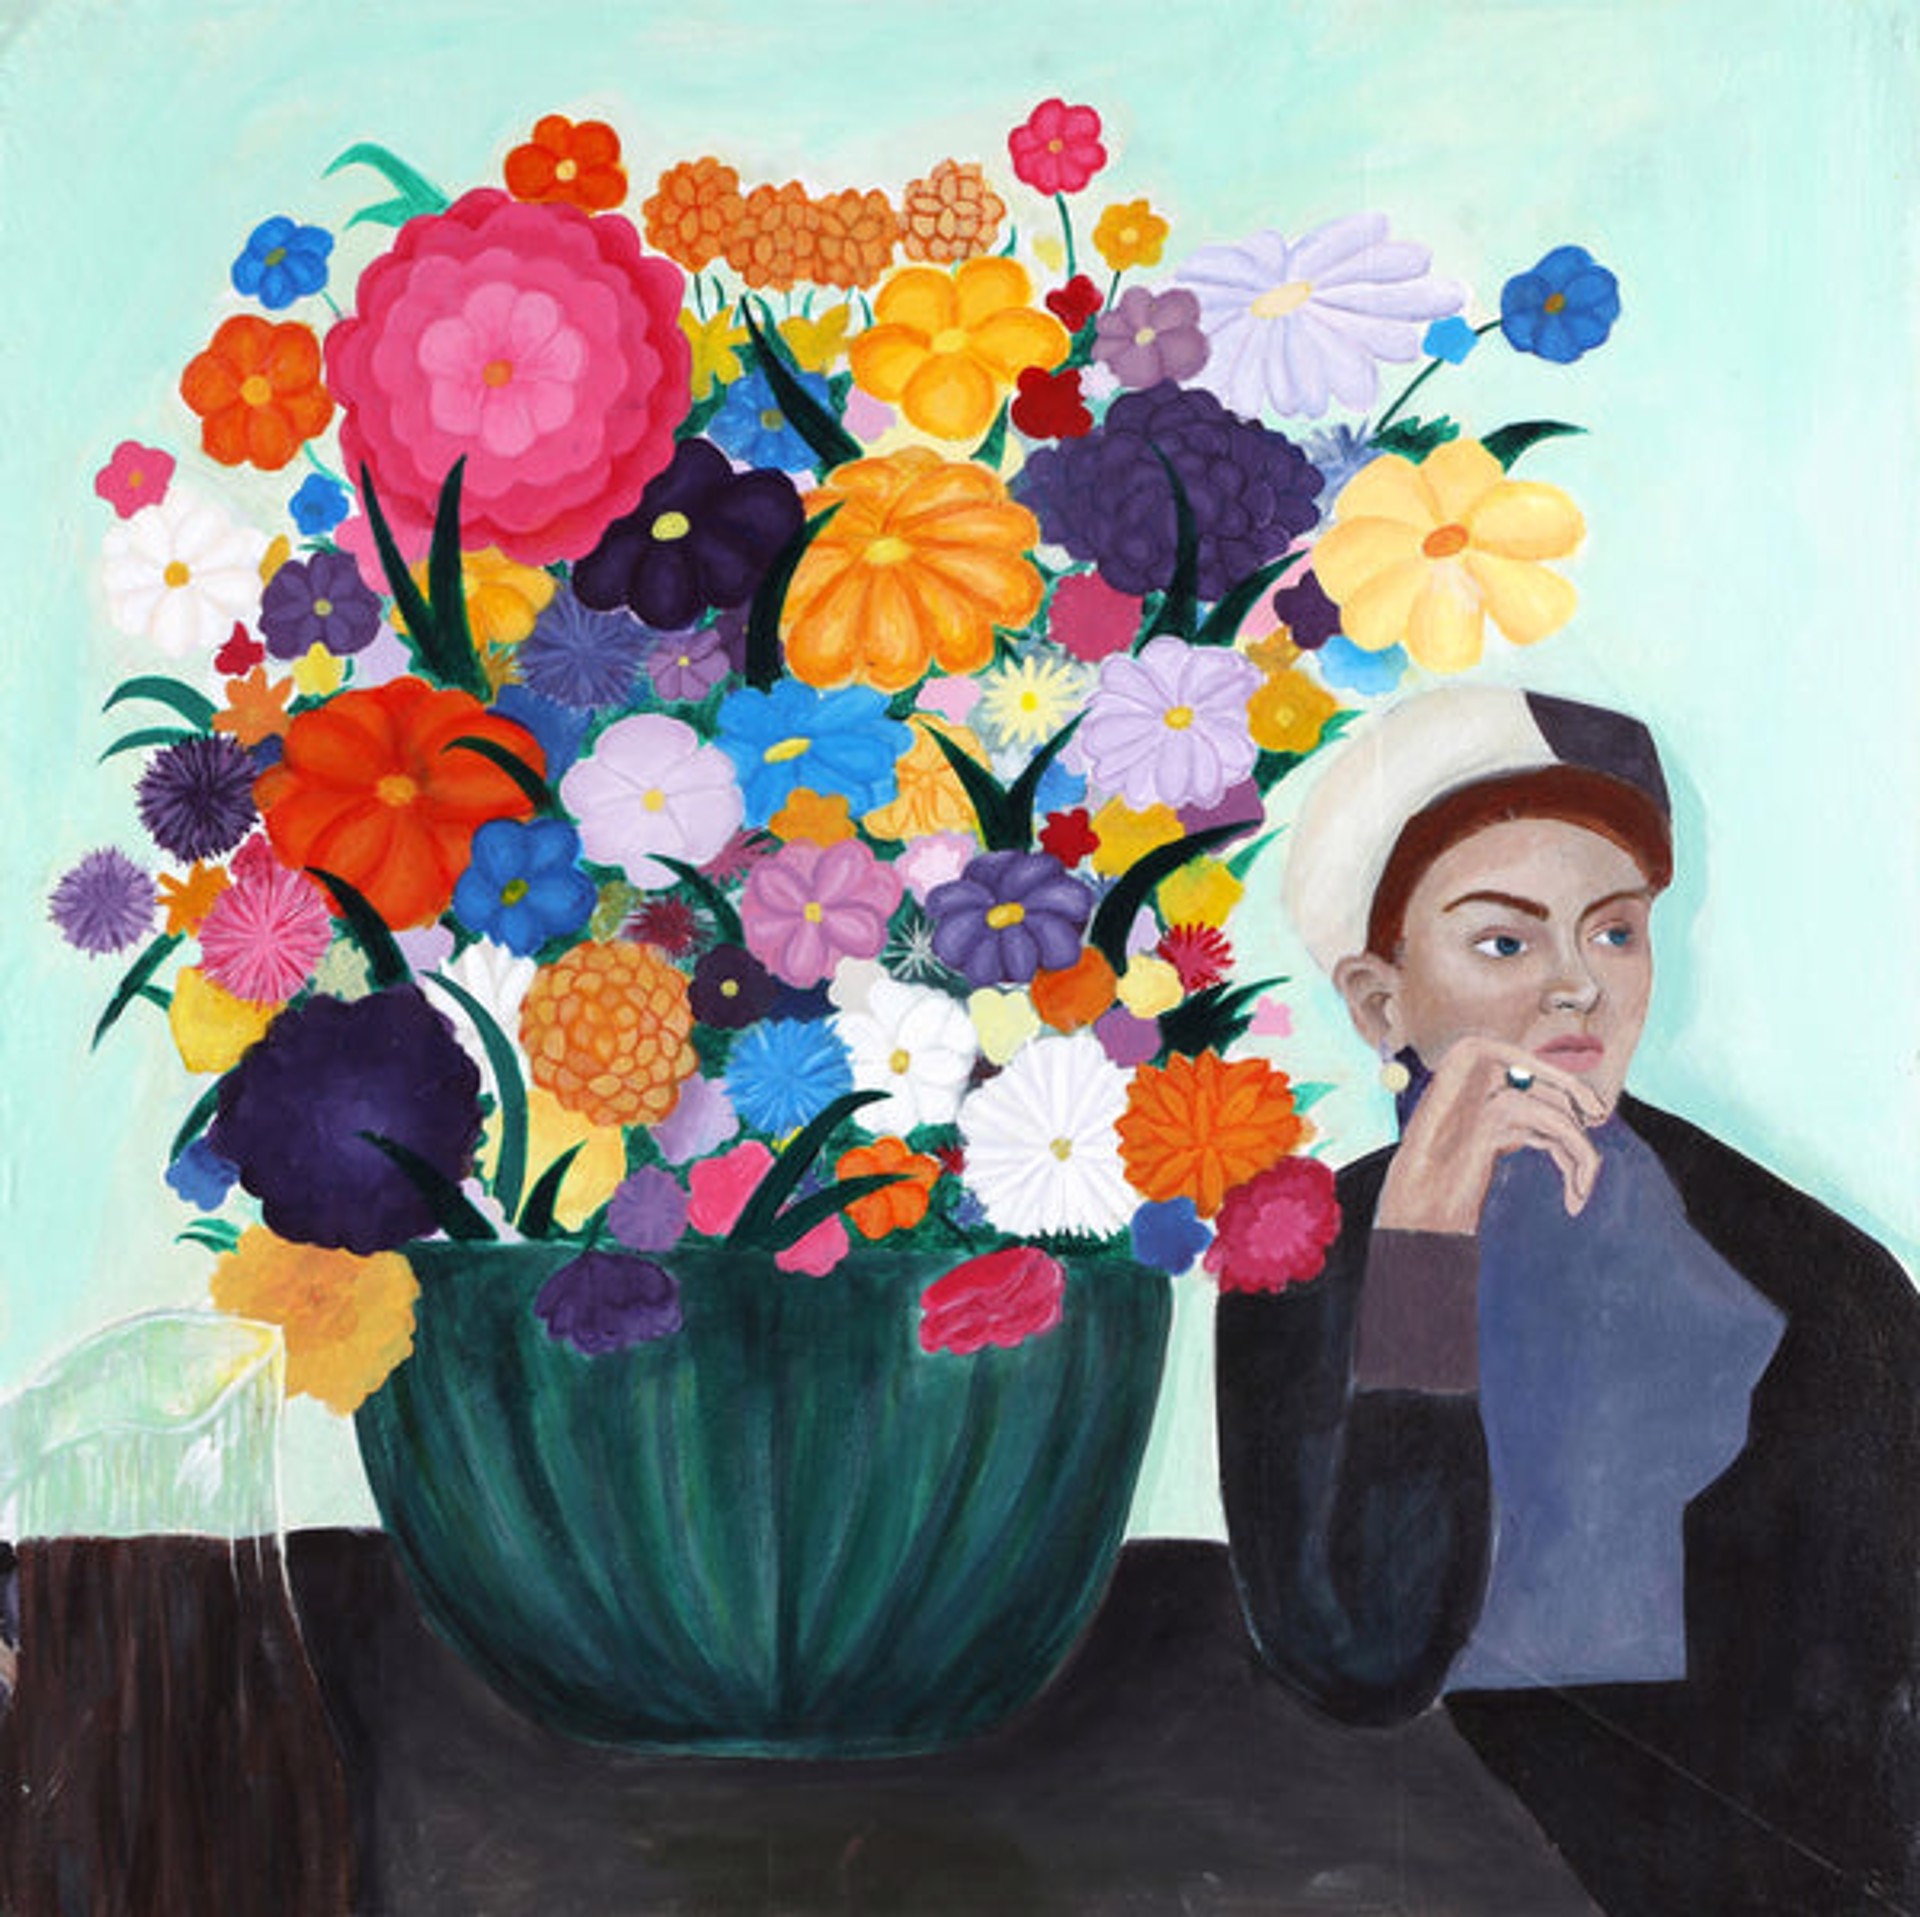 Woman With Flowers by Madeline Murphy